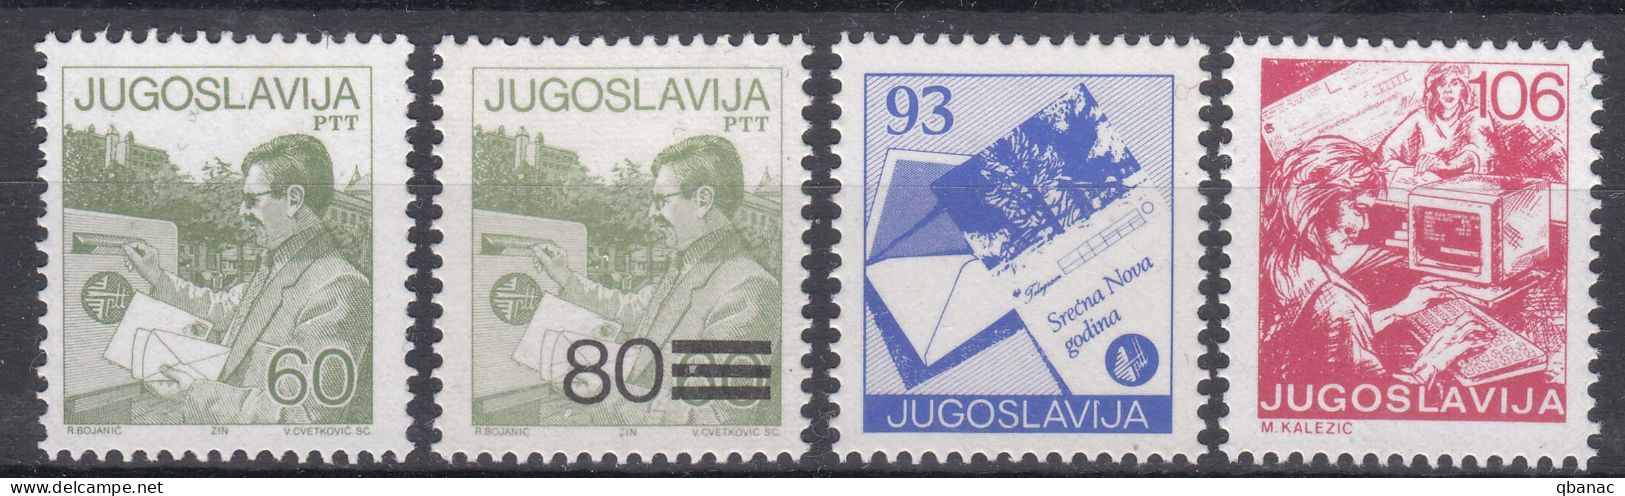 Yugoslavia Republic 1987 Definitive Stamps, Mint Never Hinged - Unused Stamps